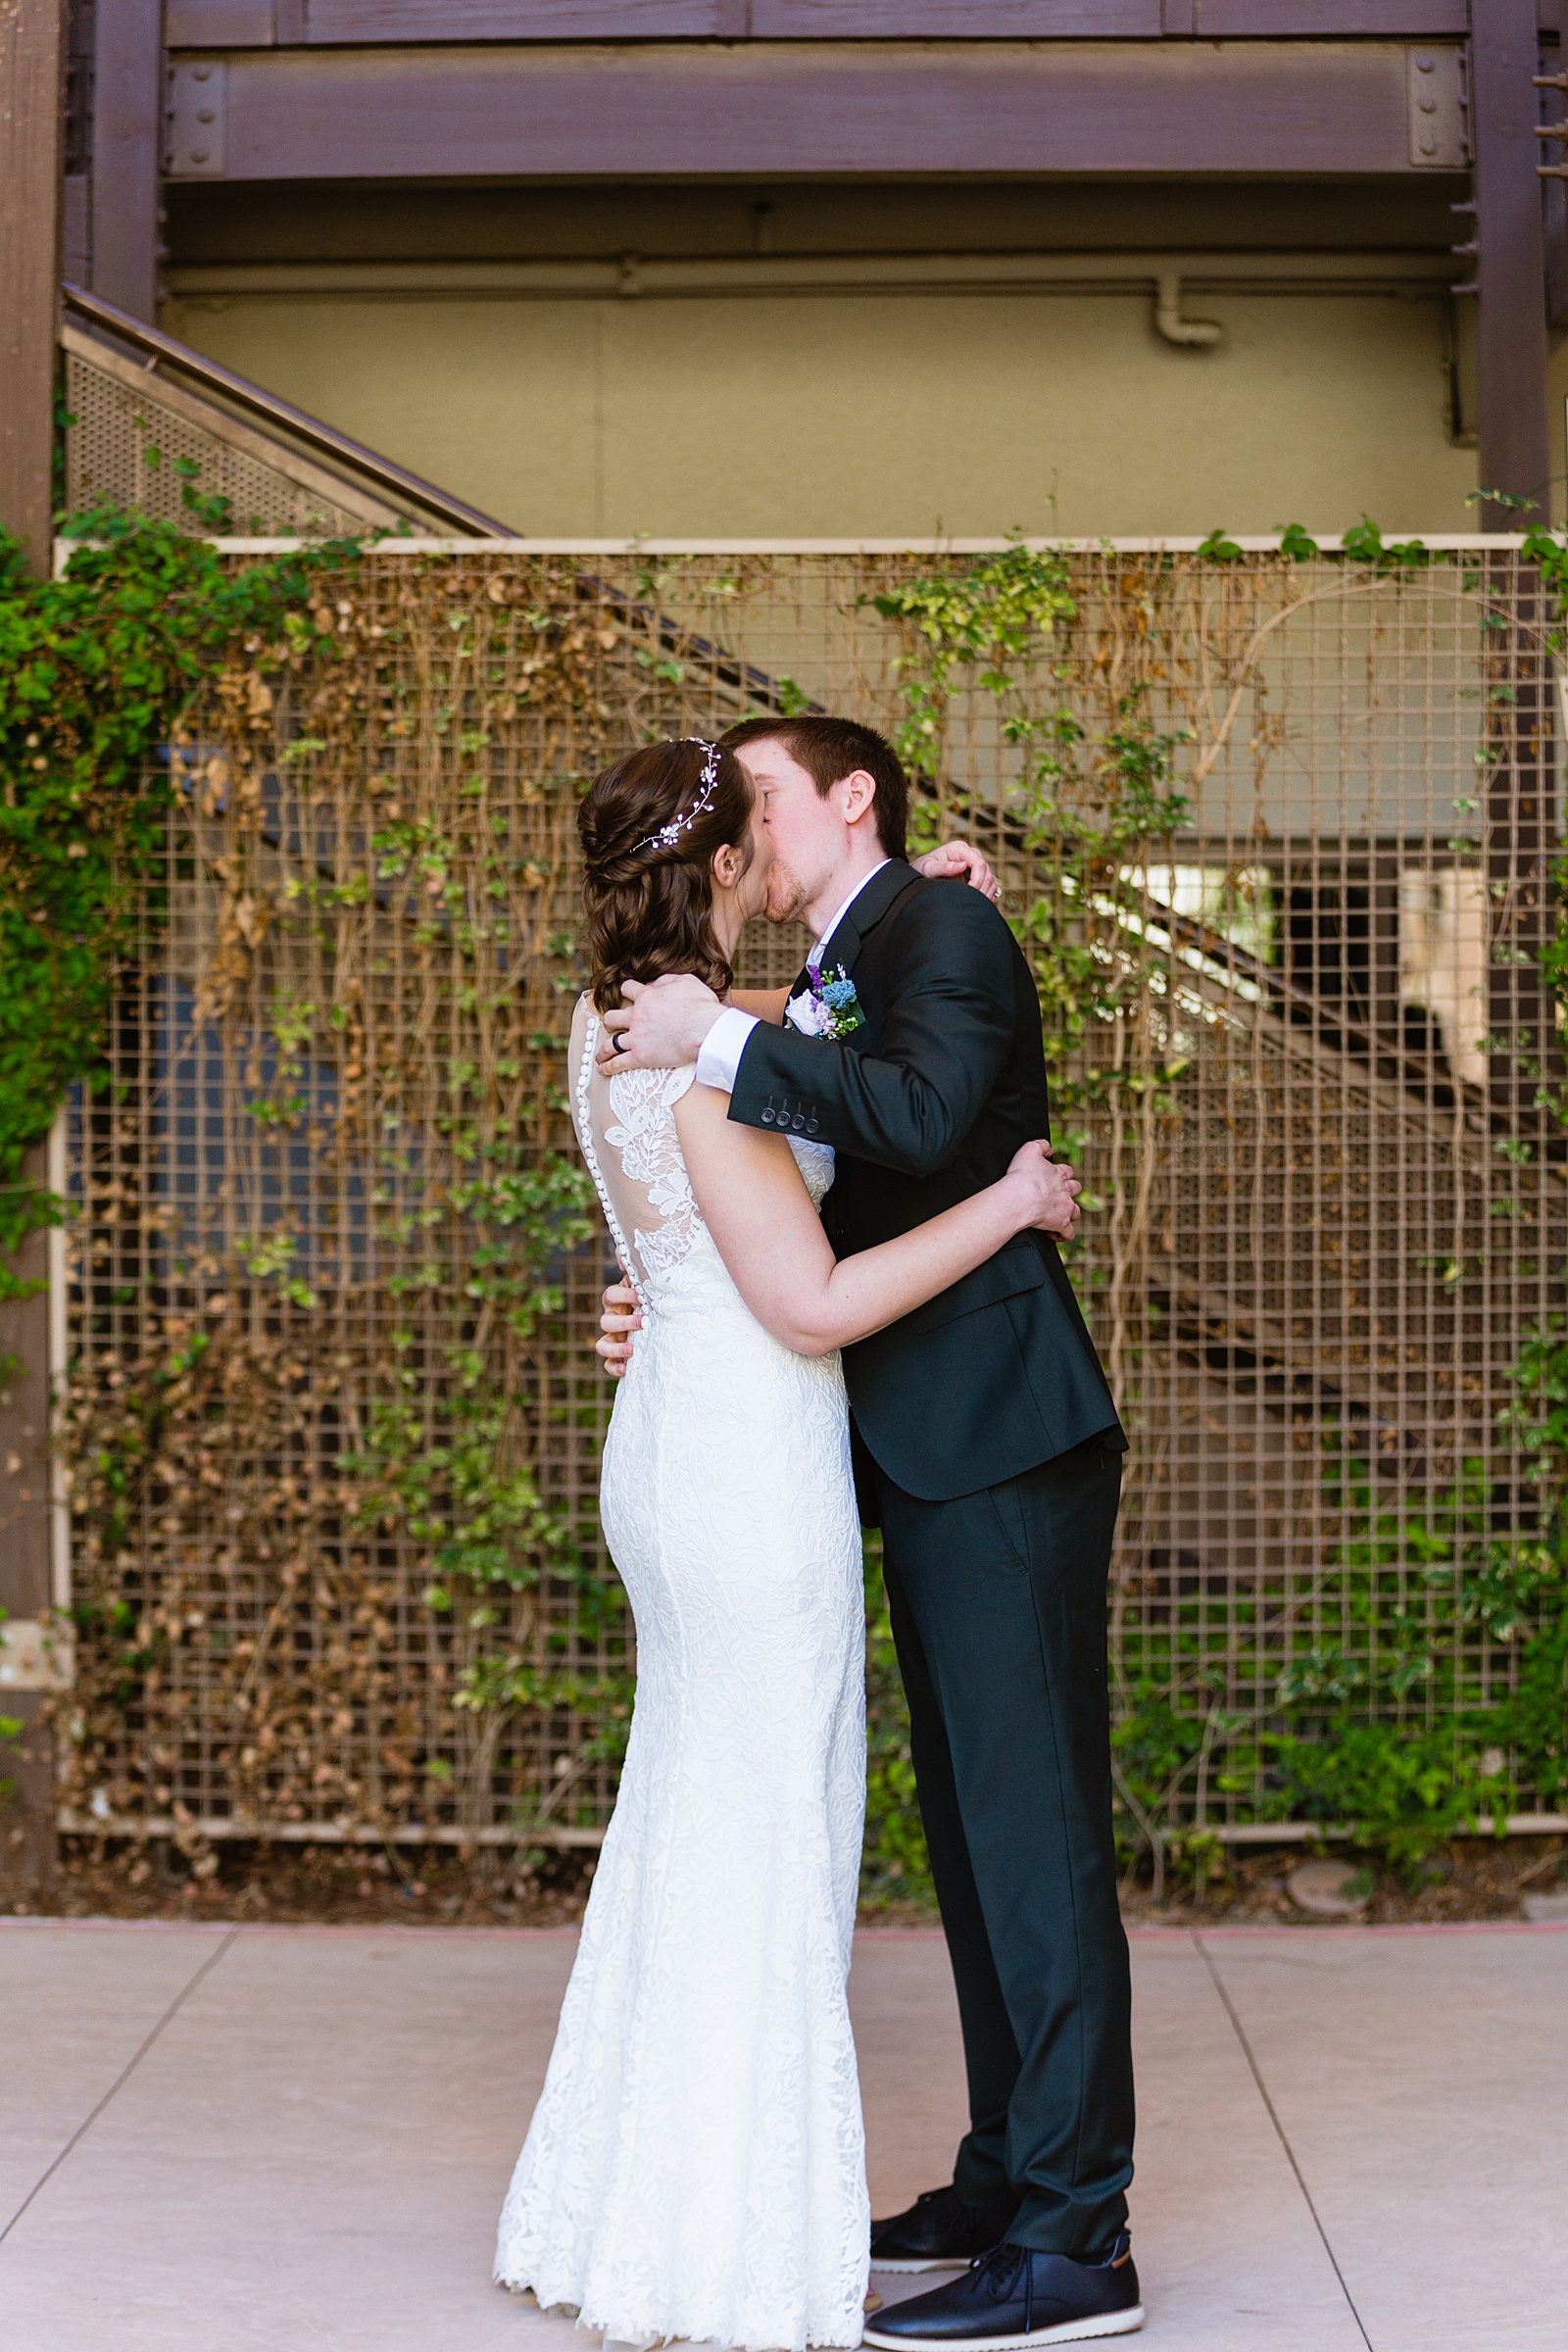 Bride and groom share their first kiss during their wedding ceremony at Chandler Community Center by Arizona wedding photographer PMA Photography.